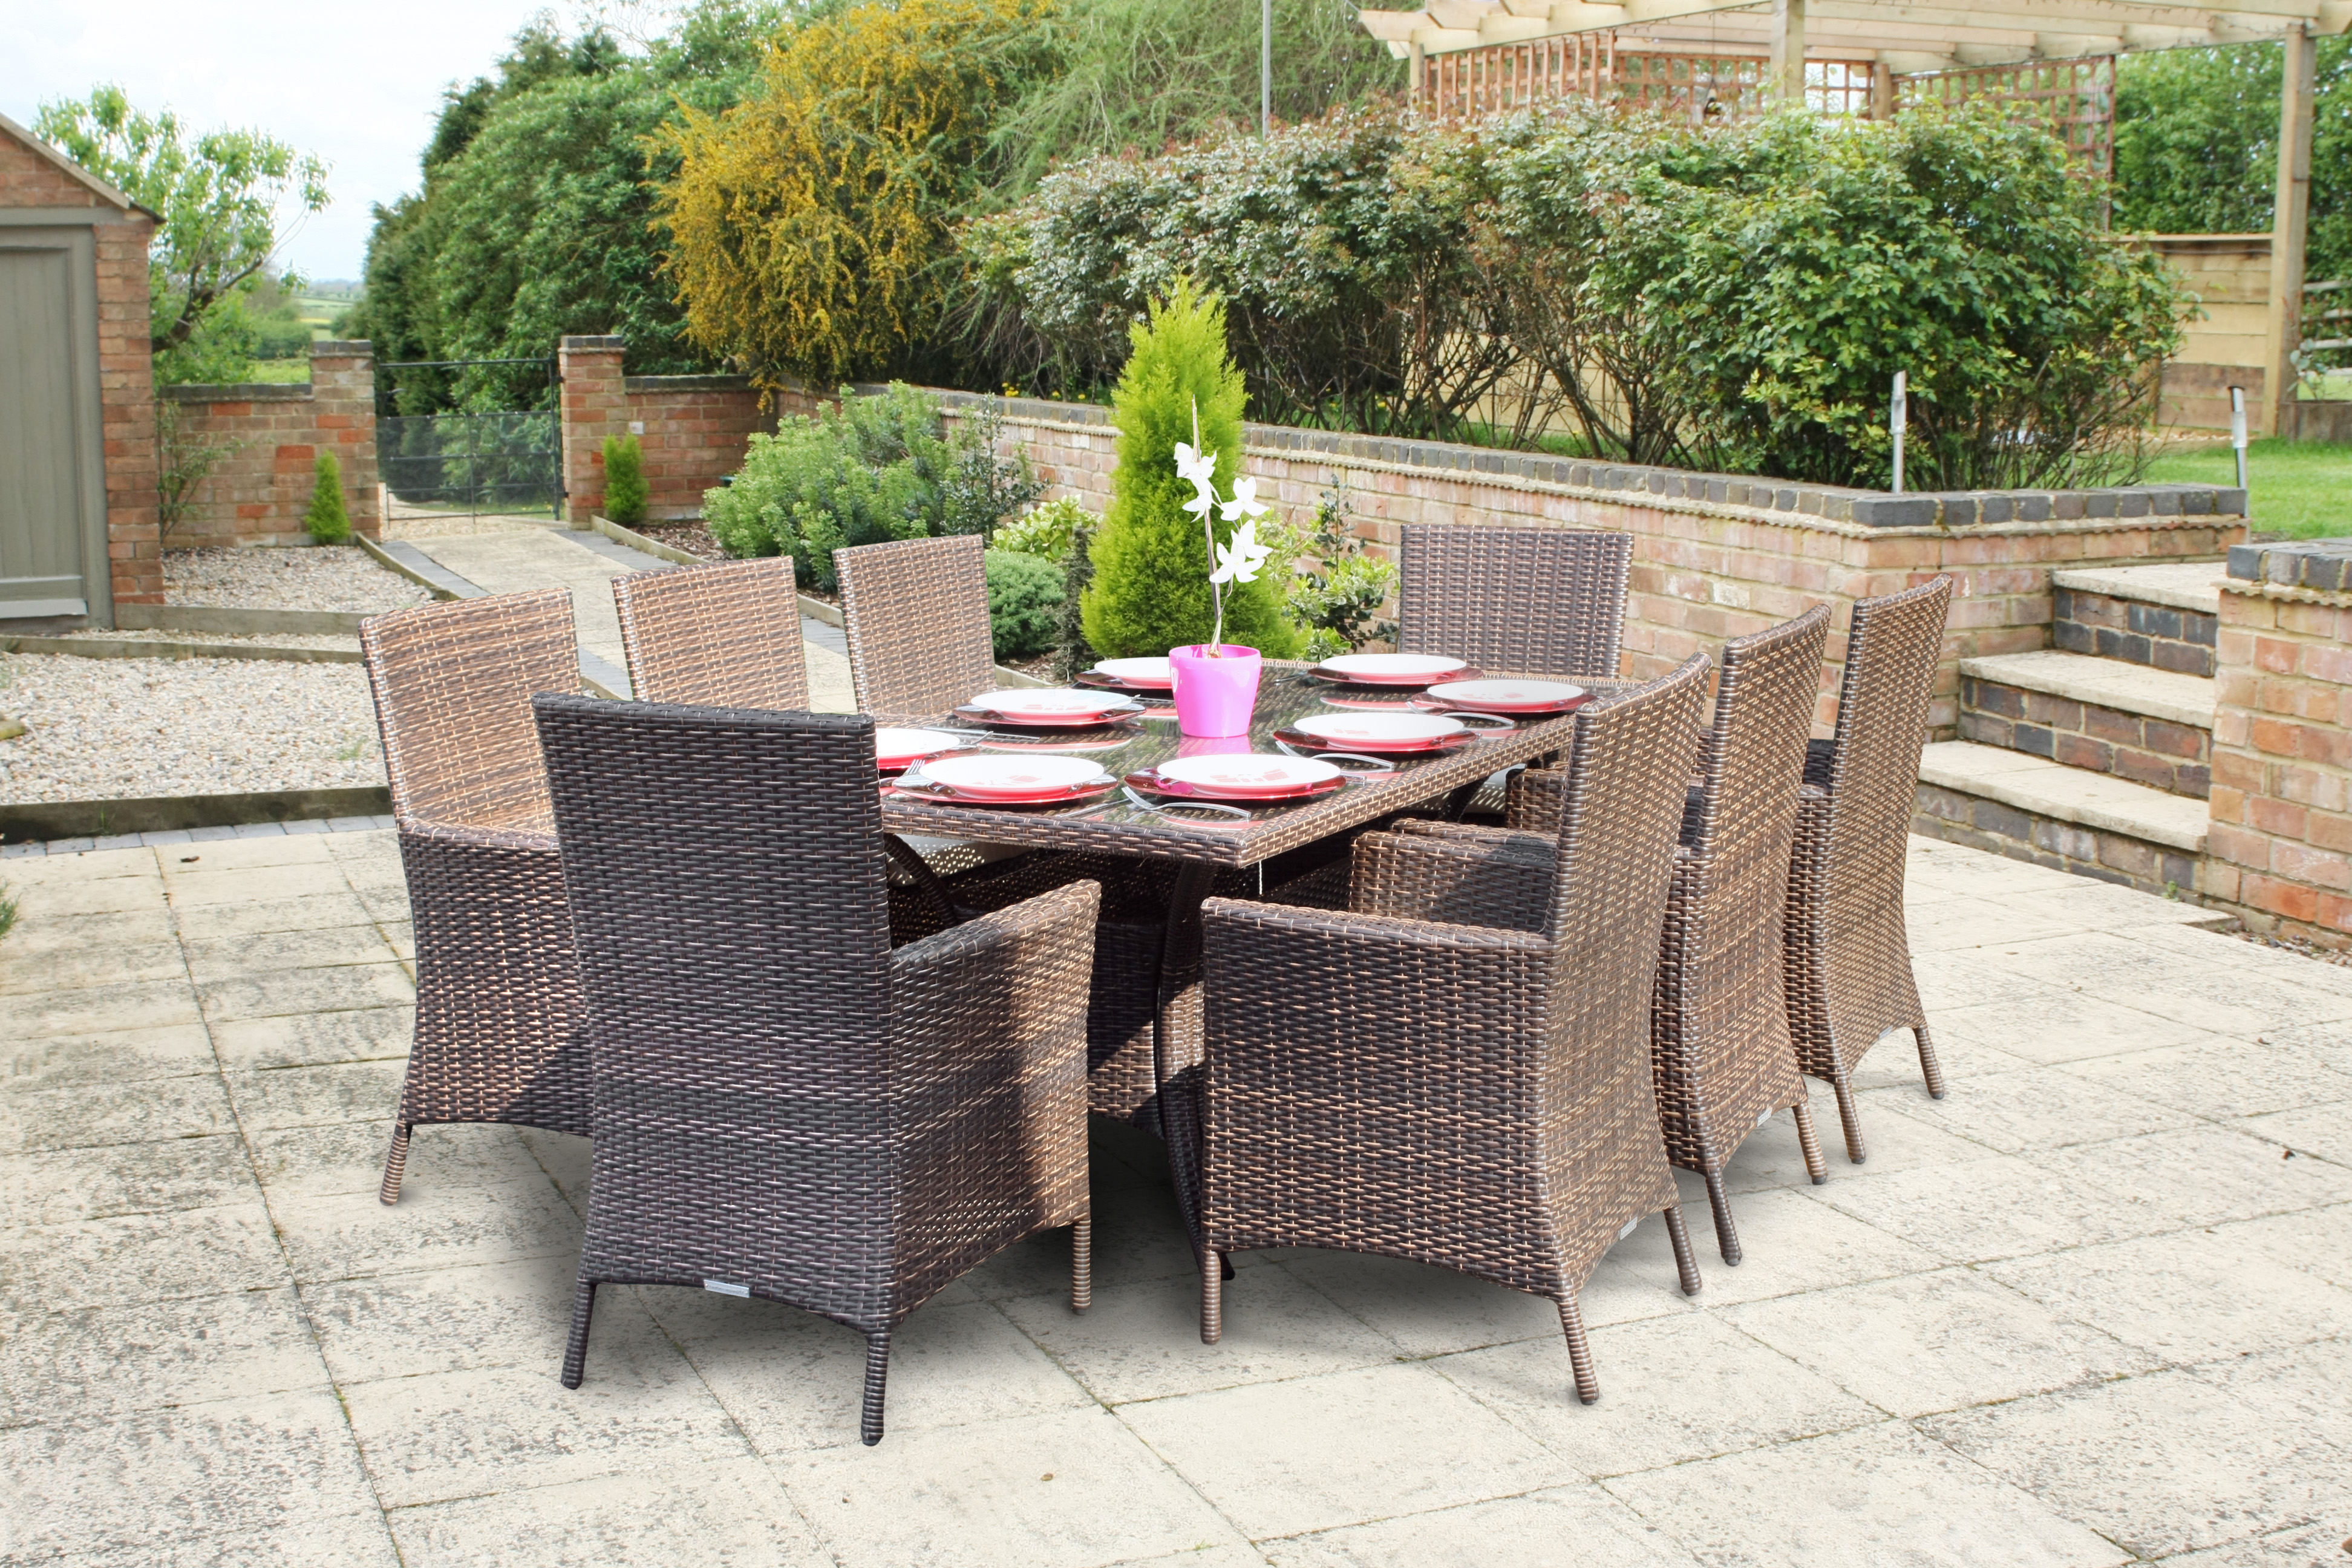 Wovenhill are Proud to Supply ITN News with Rattan Garden Furniture for